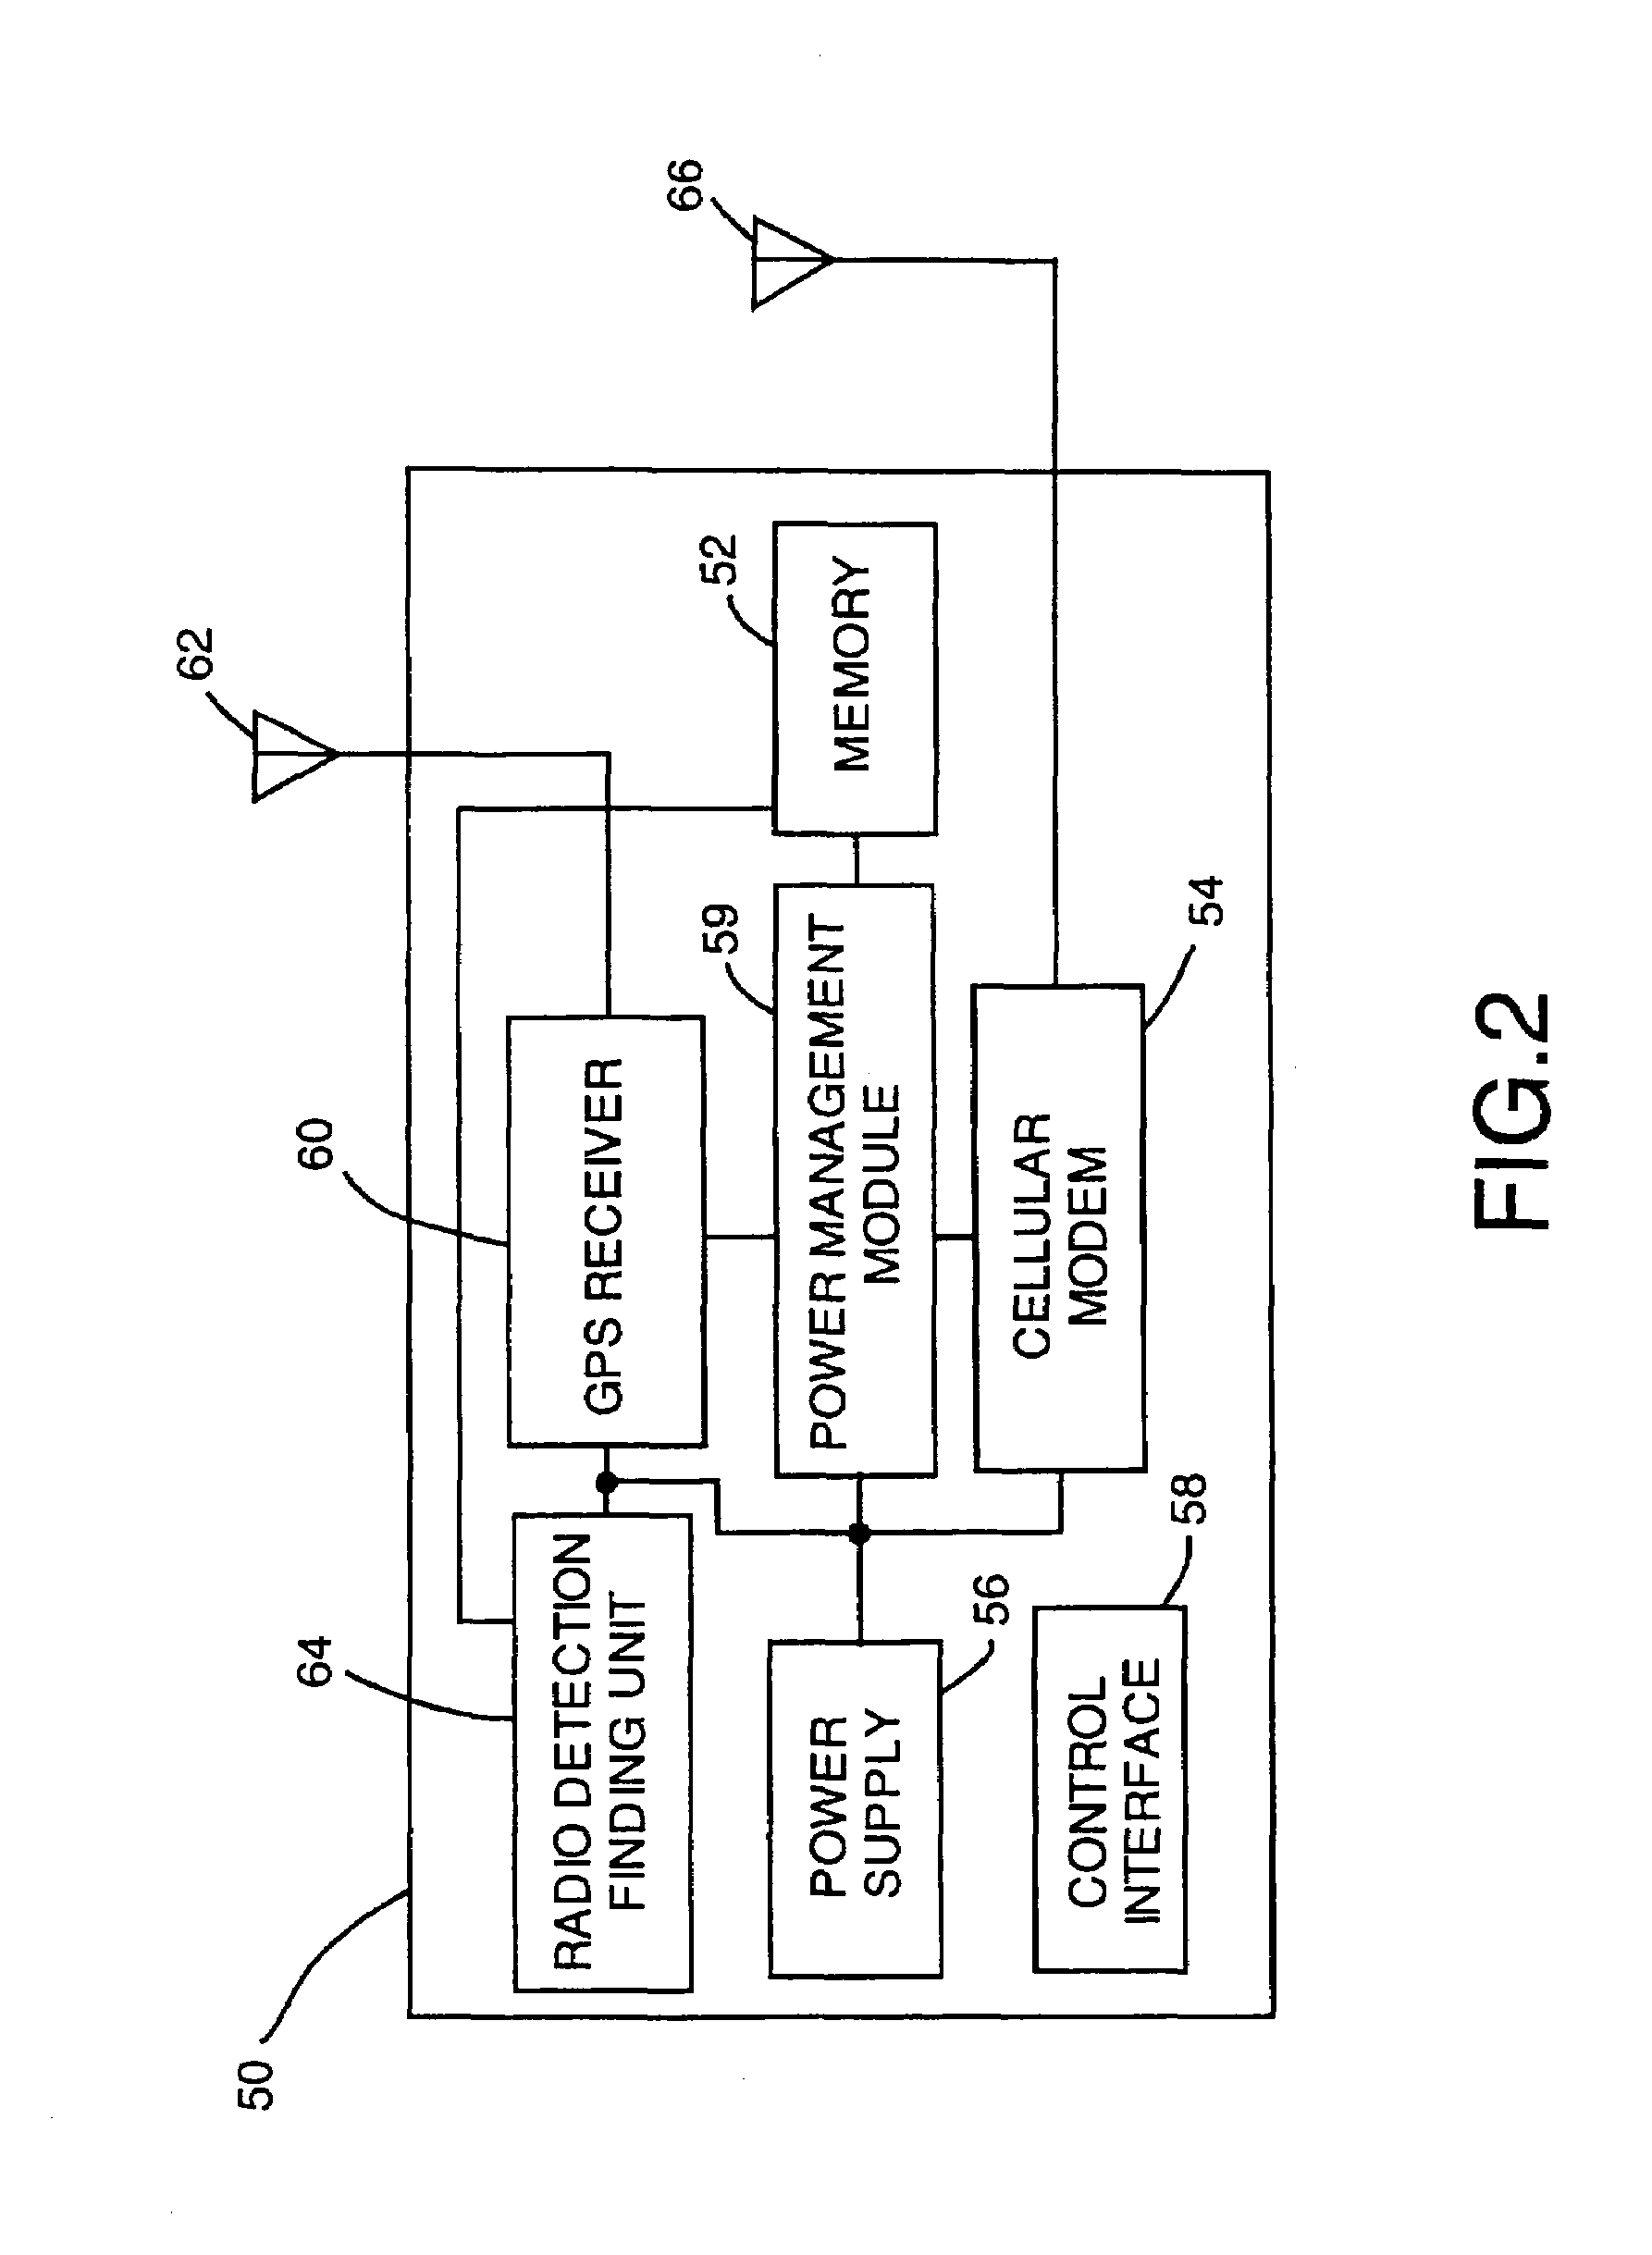 Portable locator system and method